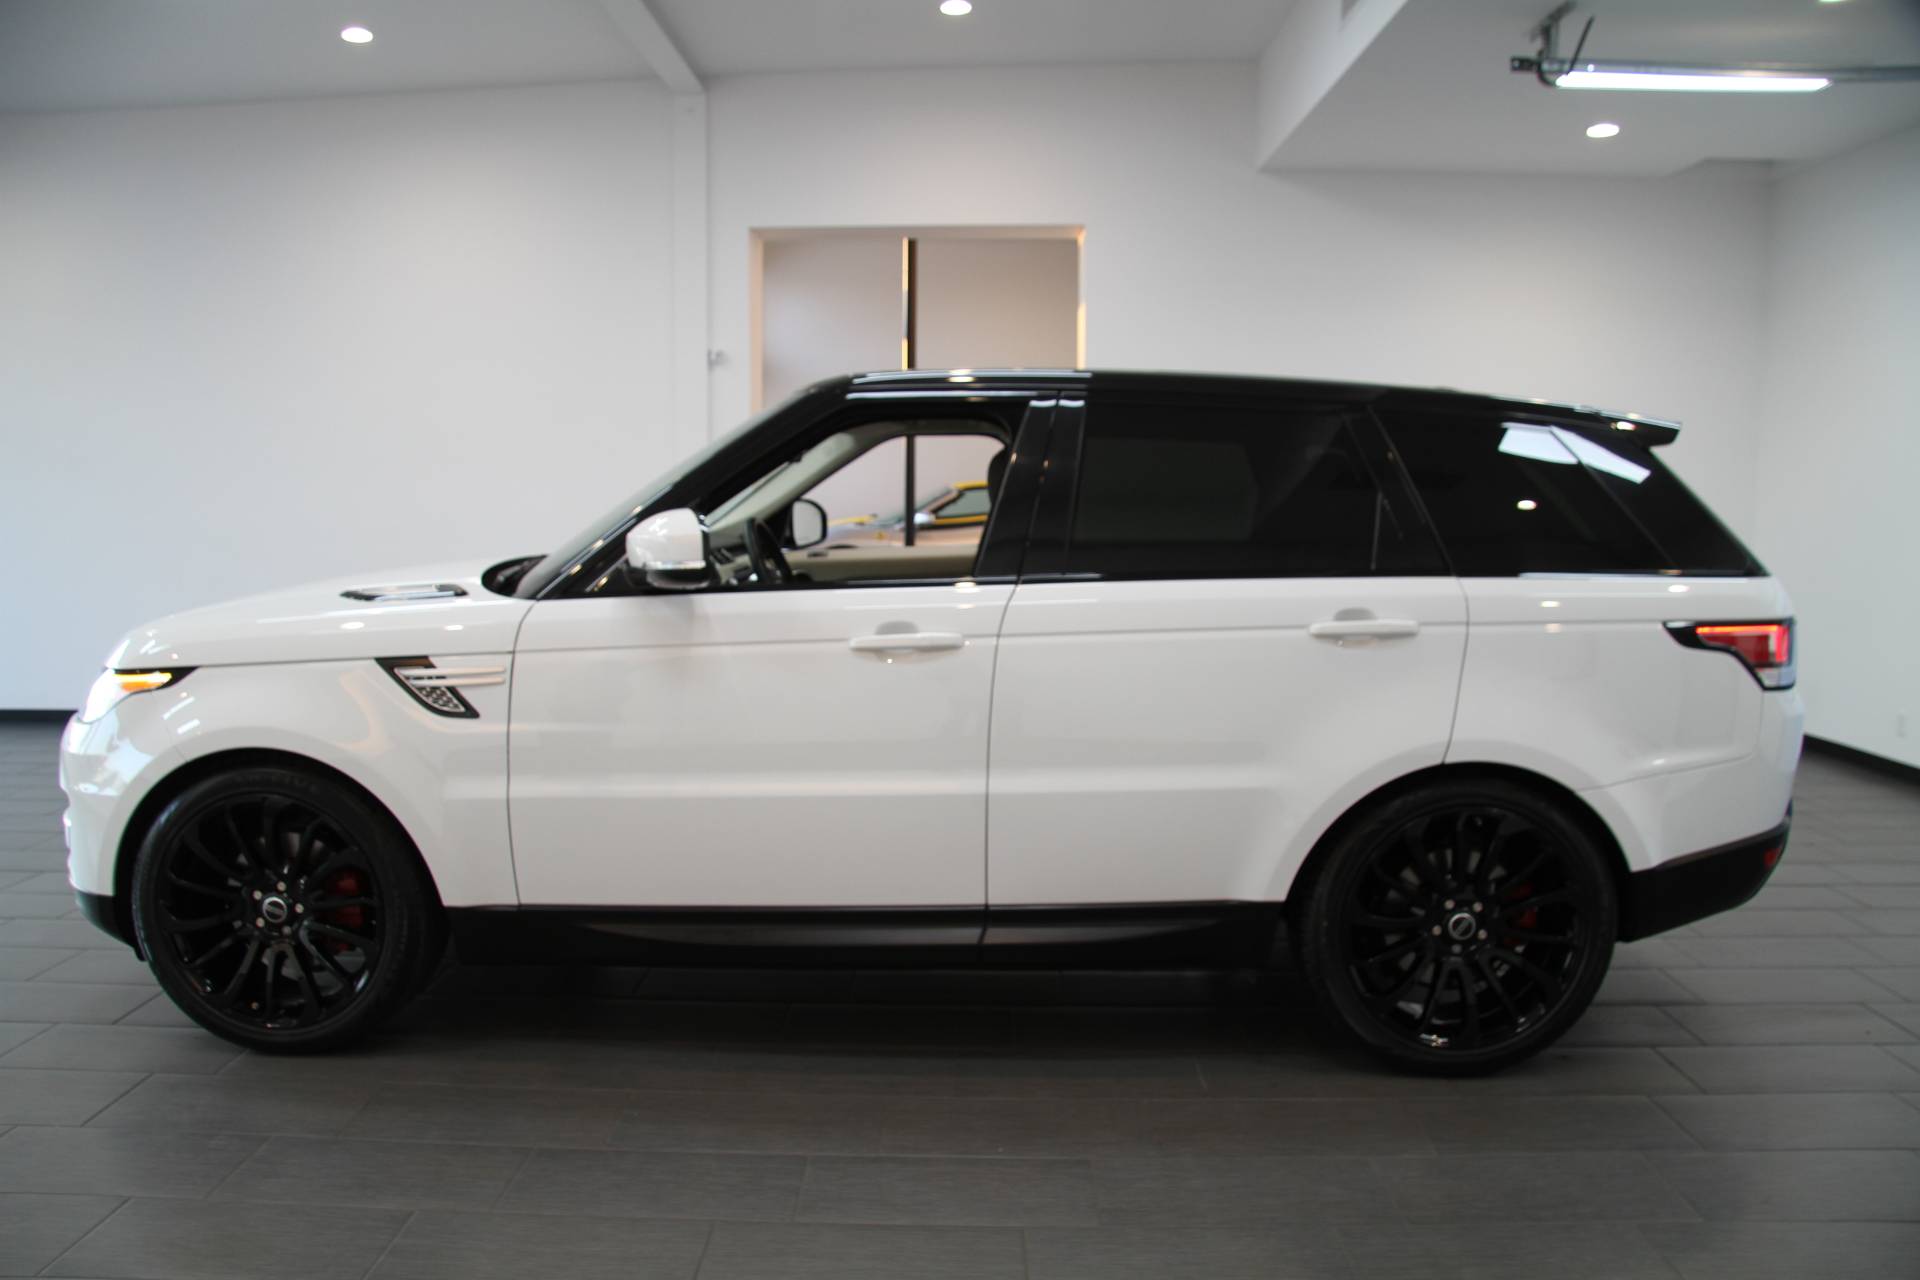 2015 Land Rover Range Rover Sport Hse Stock 6103 For Sale